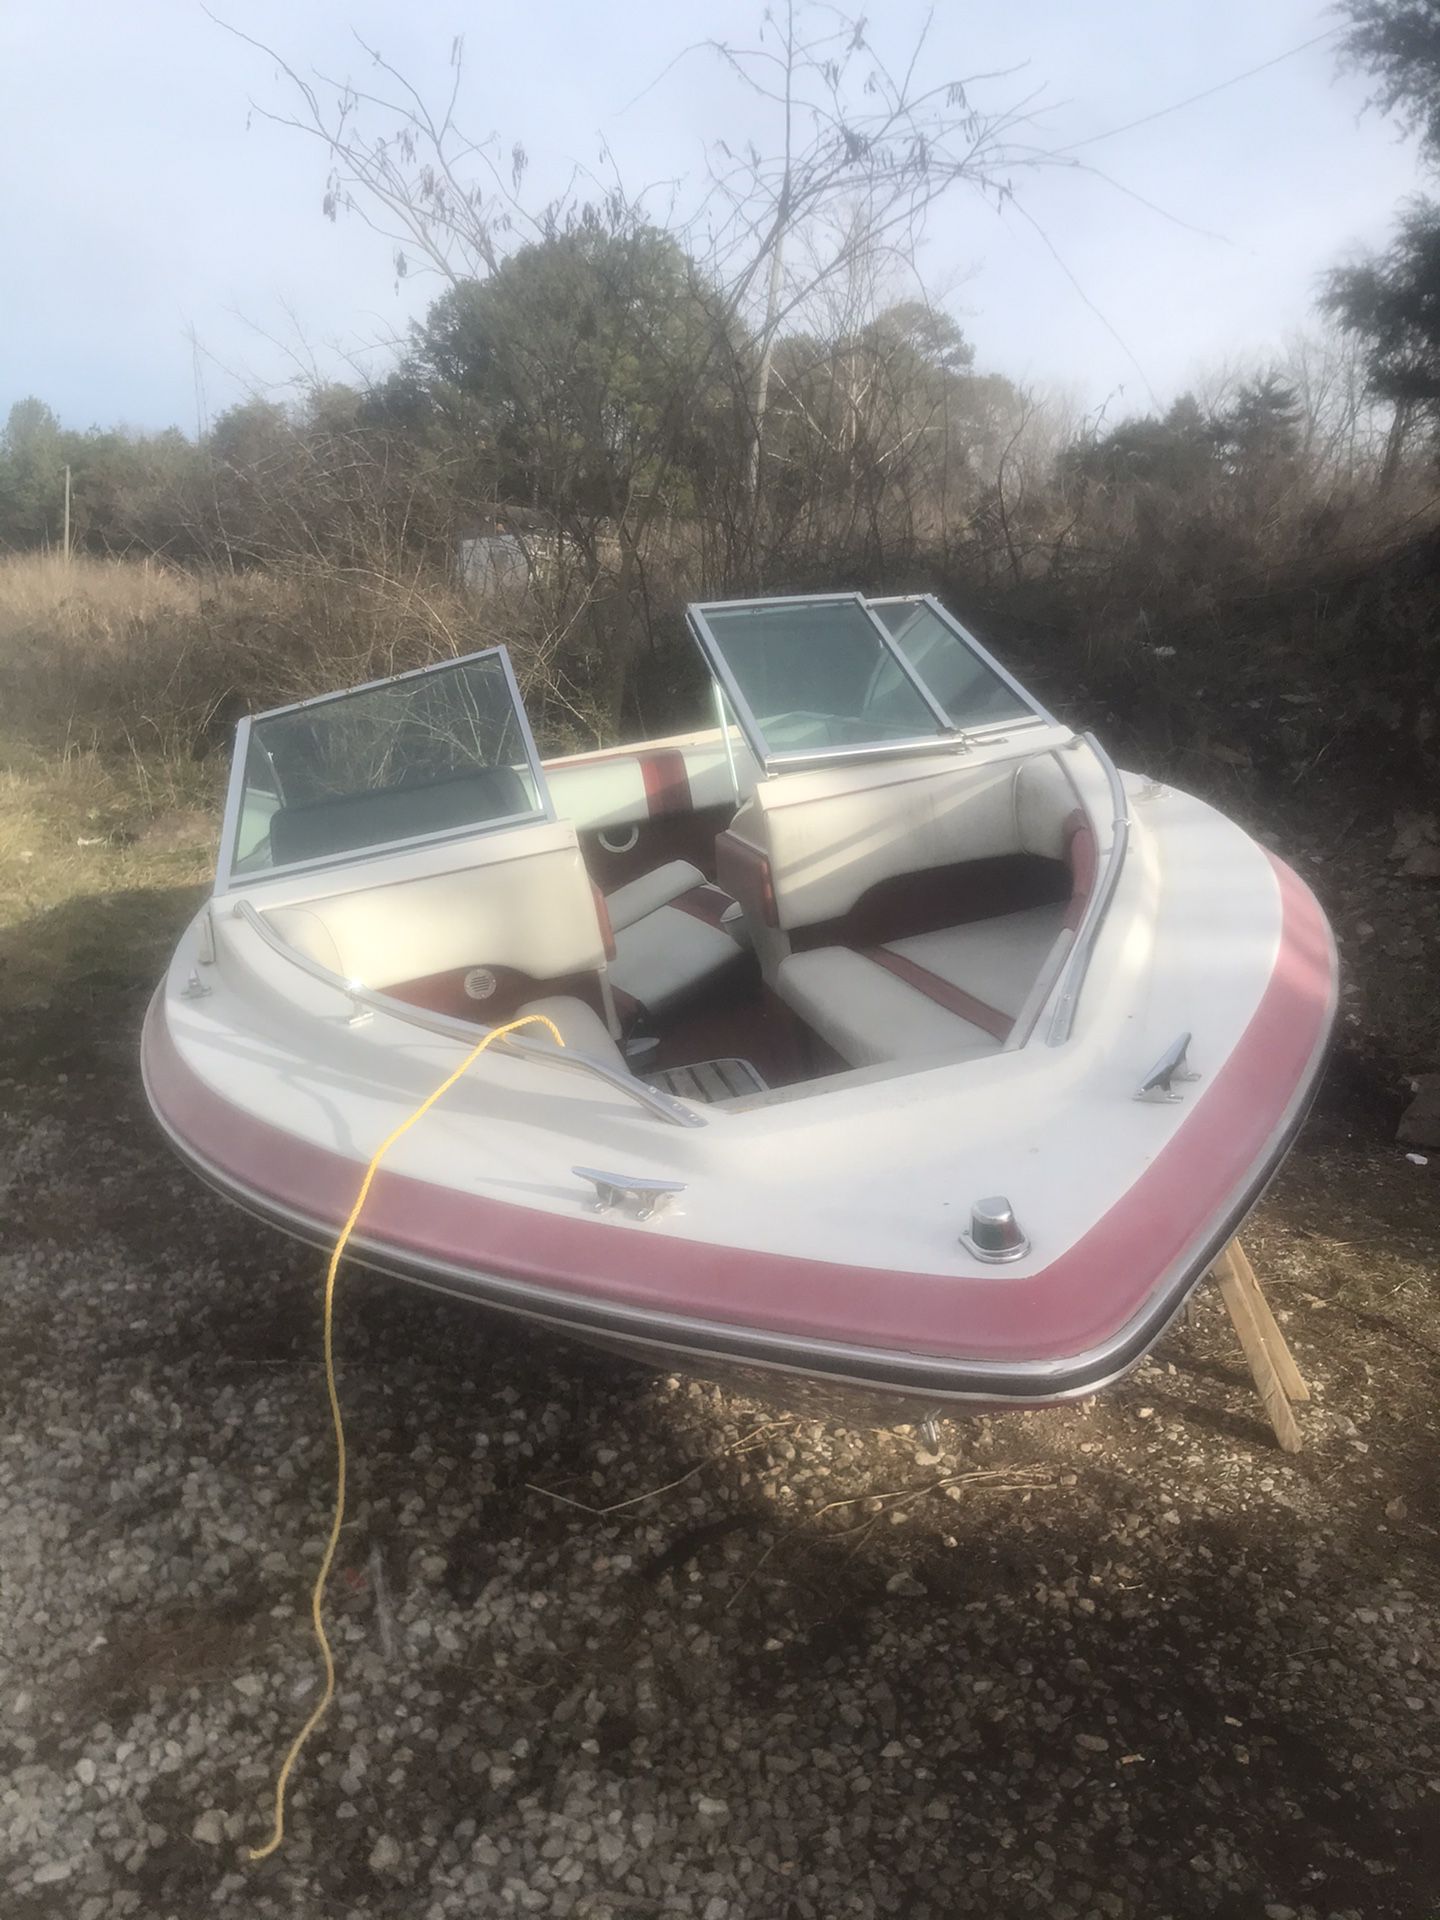 Photo Boat Parts For Sale Parting Out This Boat